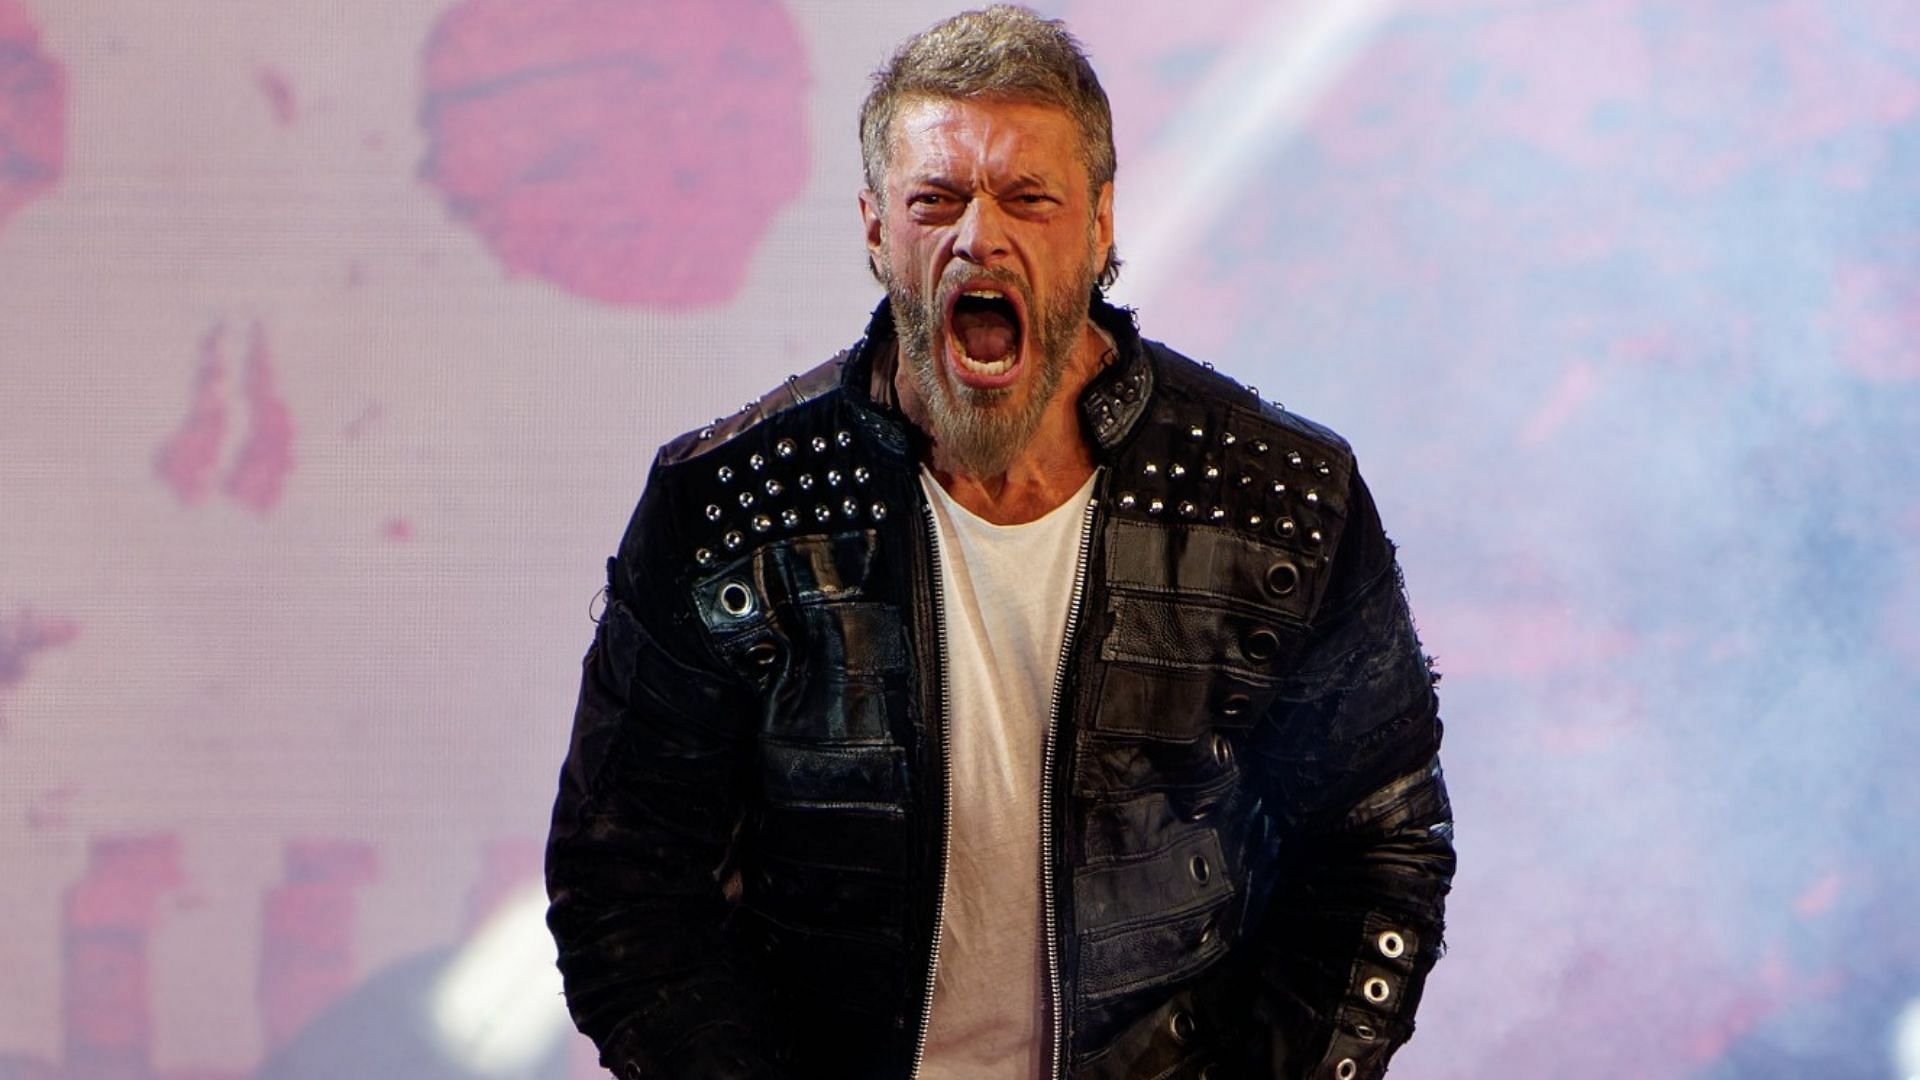 Another top WWE Superstar to join AEW after Edge? Exploring the possibility